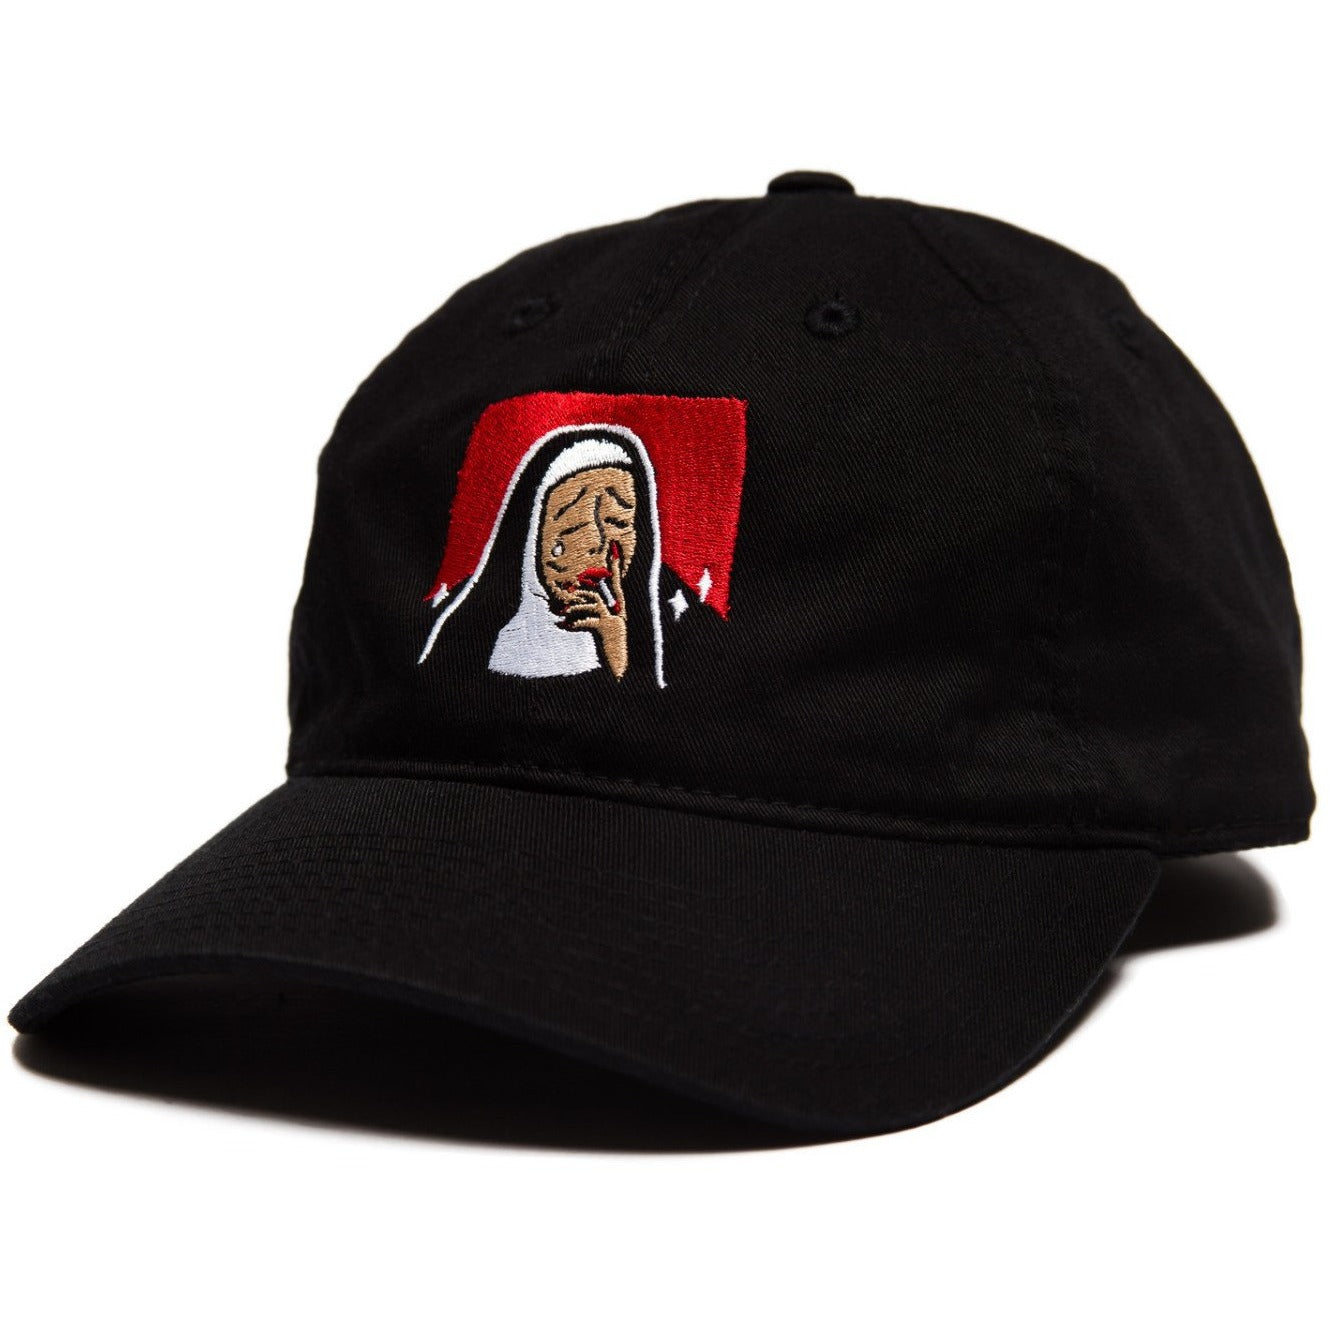 6-panel unconstructed Cotton black cap featuring Bad Nun design embroidery on the front and Bled embroidered on the side. Smoking Nun, Sin, Hat, skateboards, hype, skate, streetwear